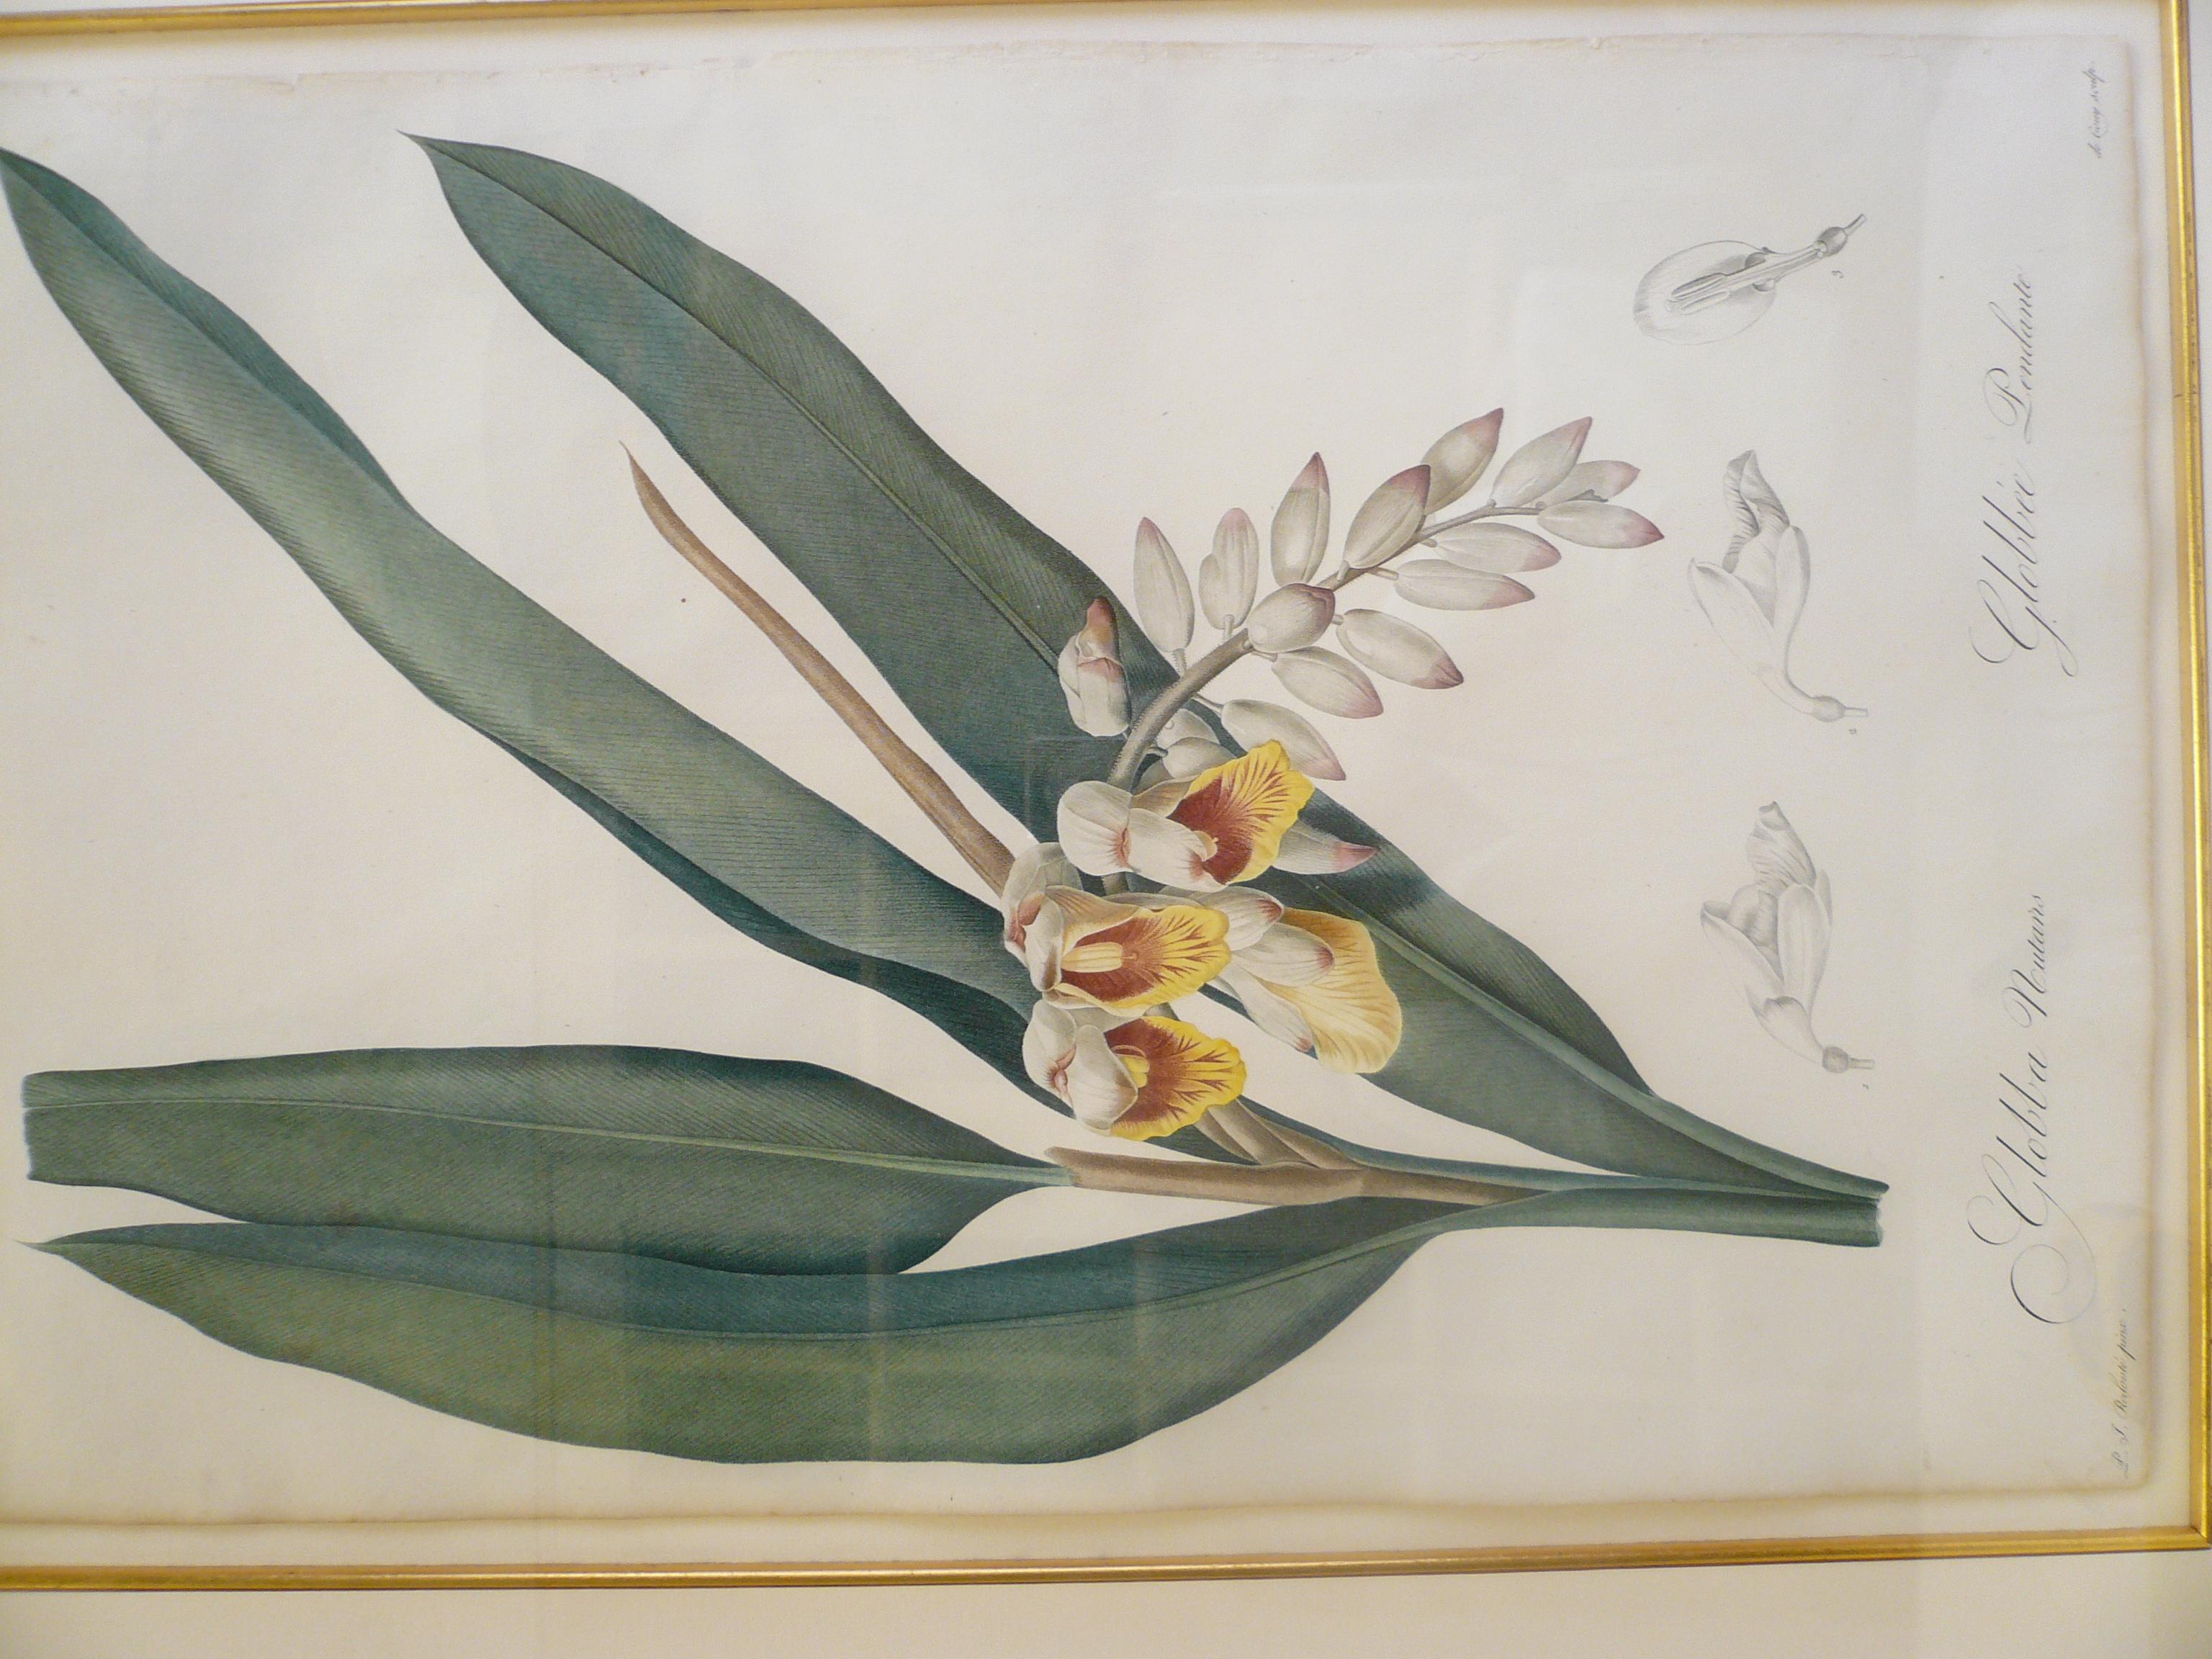 Four Botanical Engravings by Pierre Joseph Redoute 1